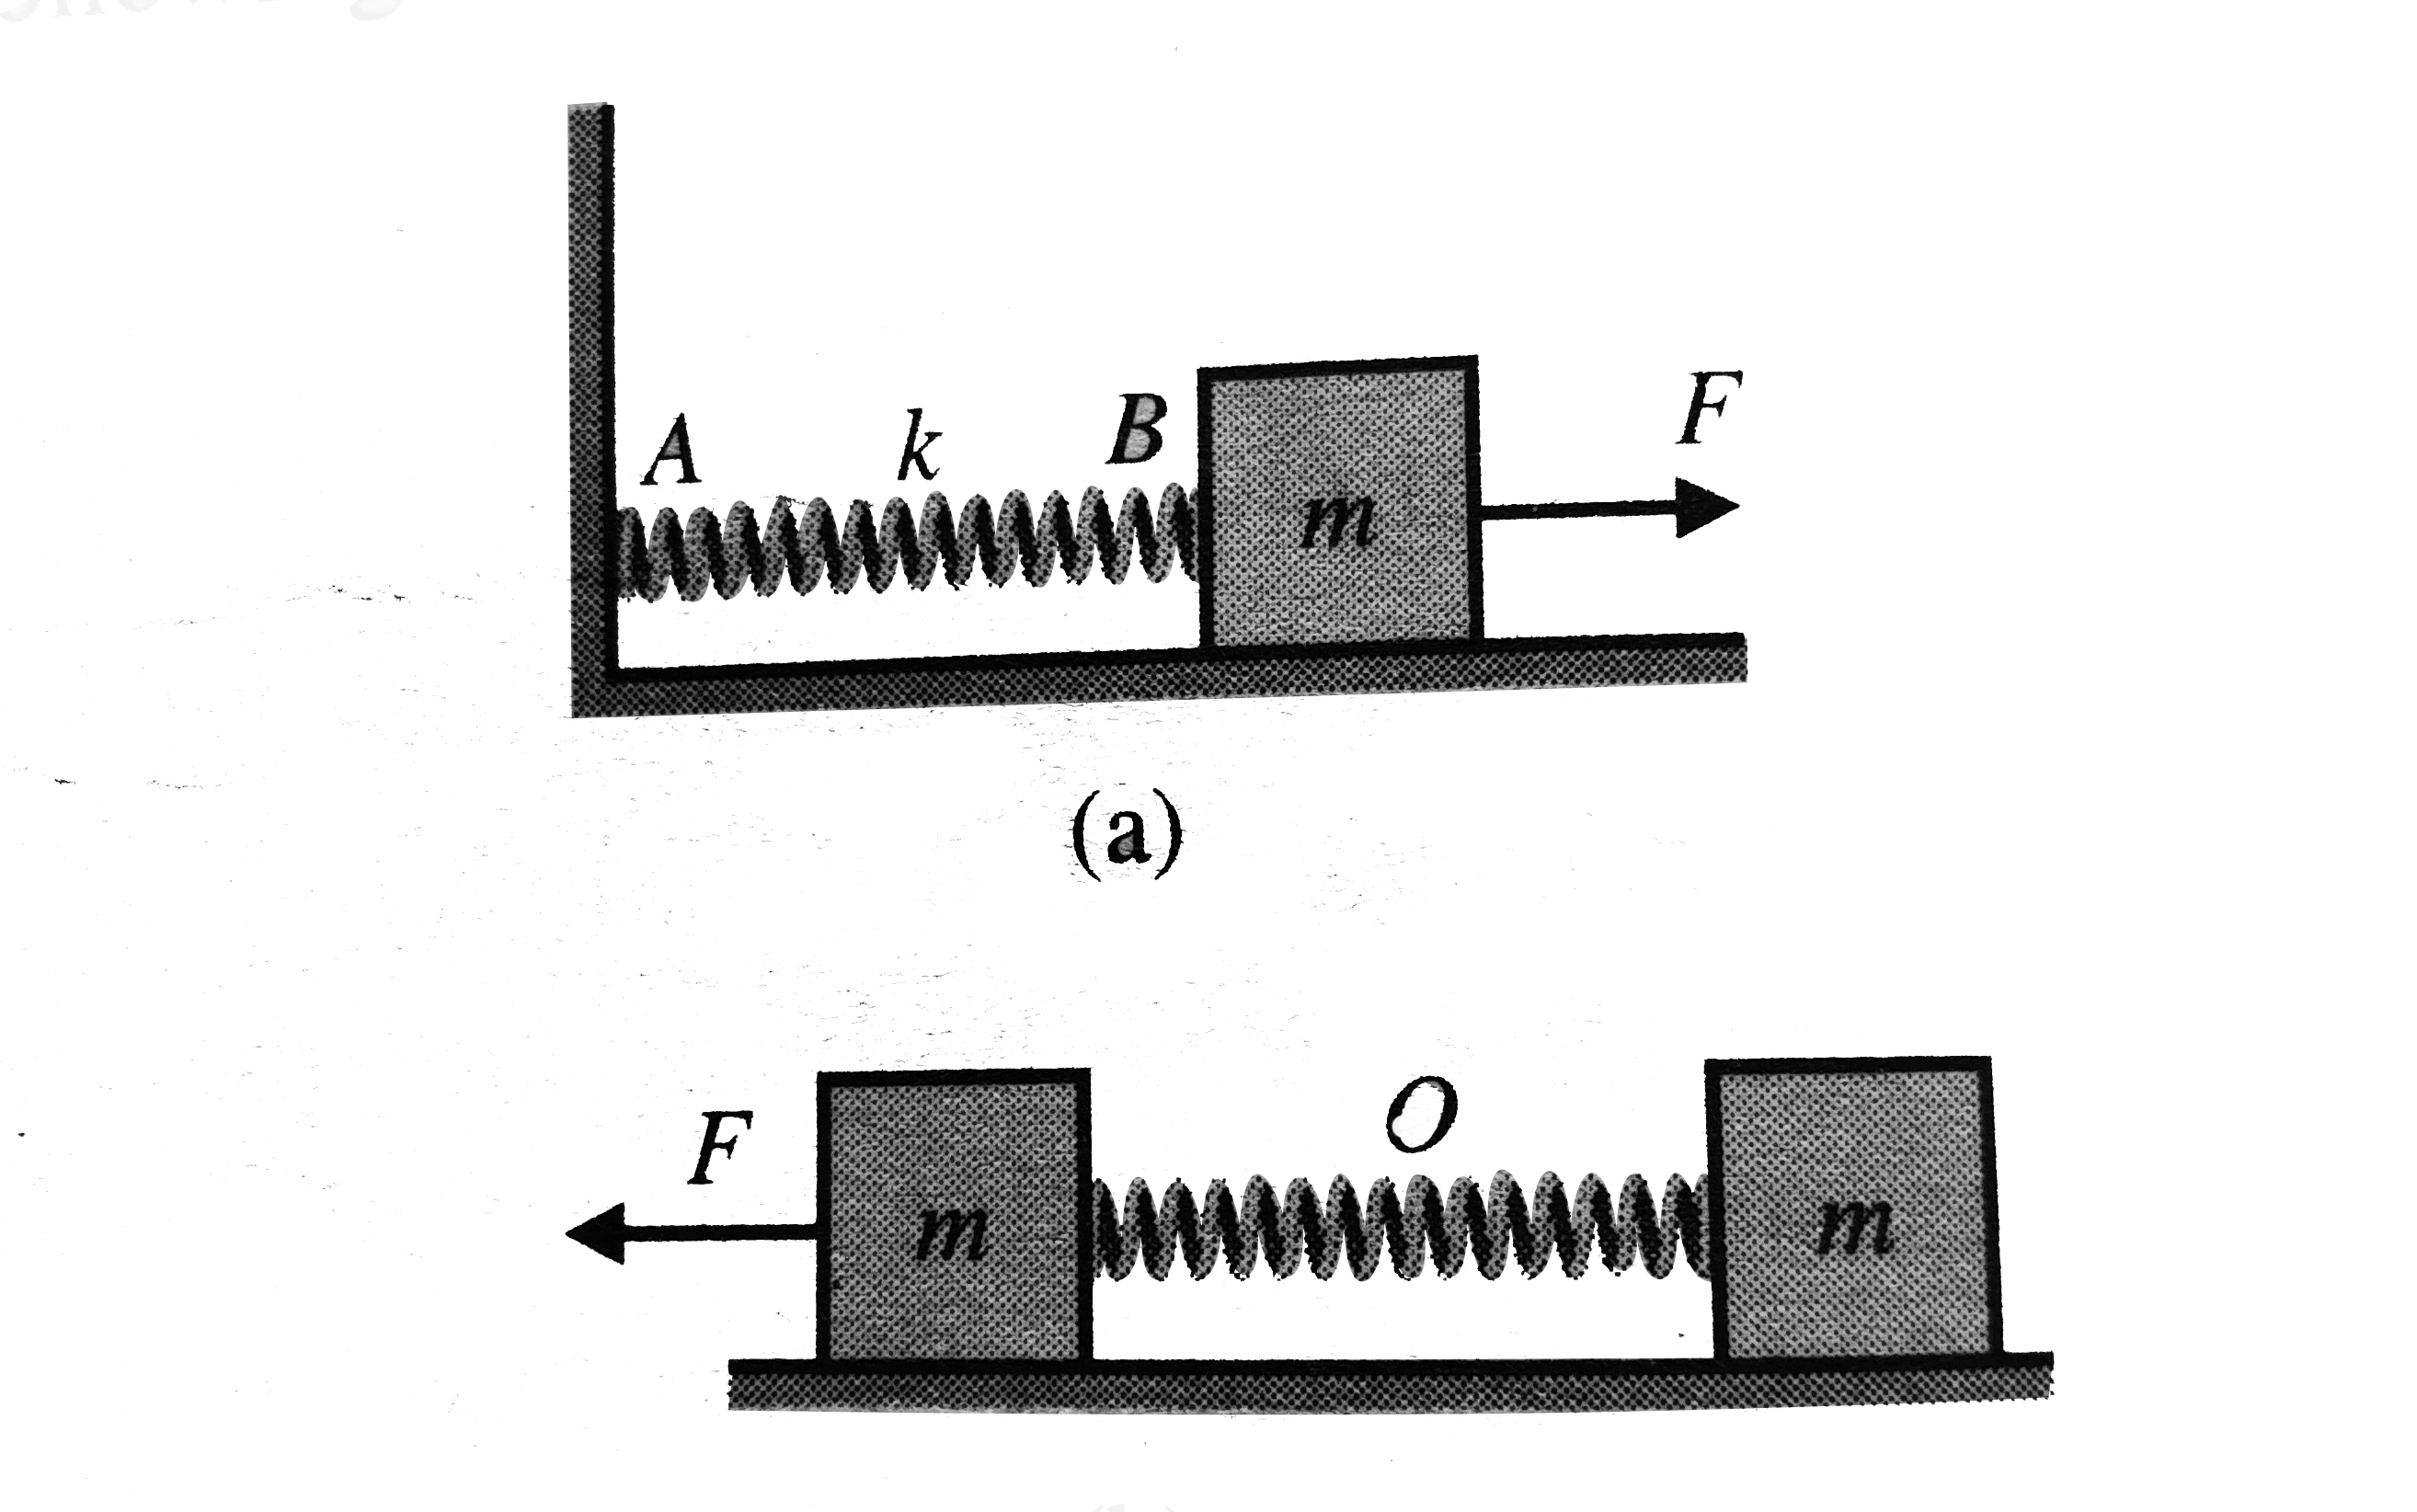 Figure. (a) shows a spring of force constant k fixed at one end and carrying a mass m at the other end placed on a horizontal frictionless surface. The spring is stretched by a force F. Figure. (b) shows the same spring with both endsf free and a mass m fixed at each free end Each of the spring is streched by the same force F. The mass in case (a) and the masses in case (b) are then released. Which of the following statements are true?